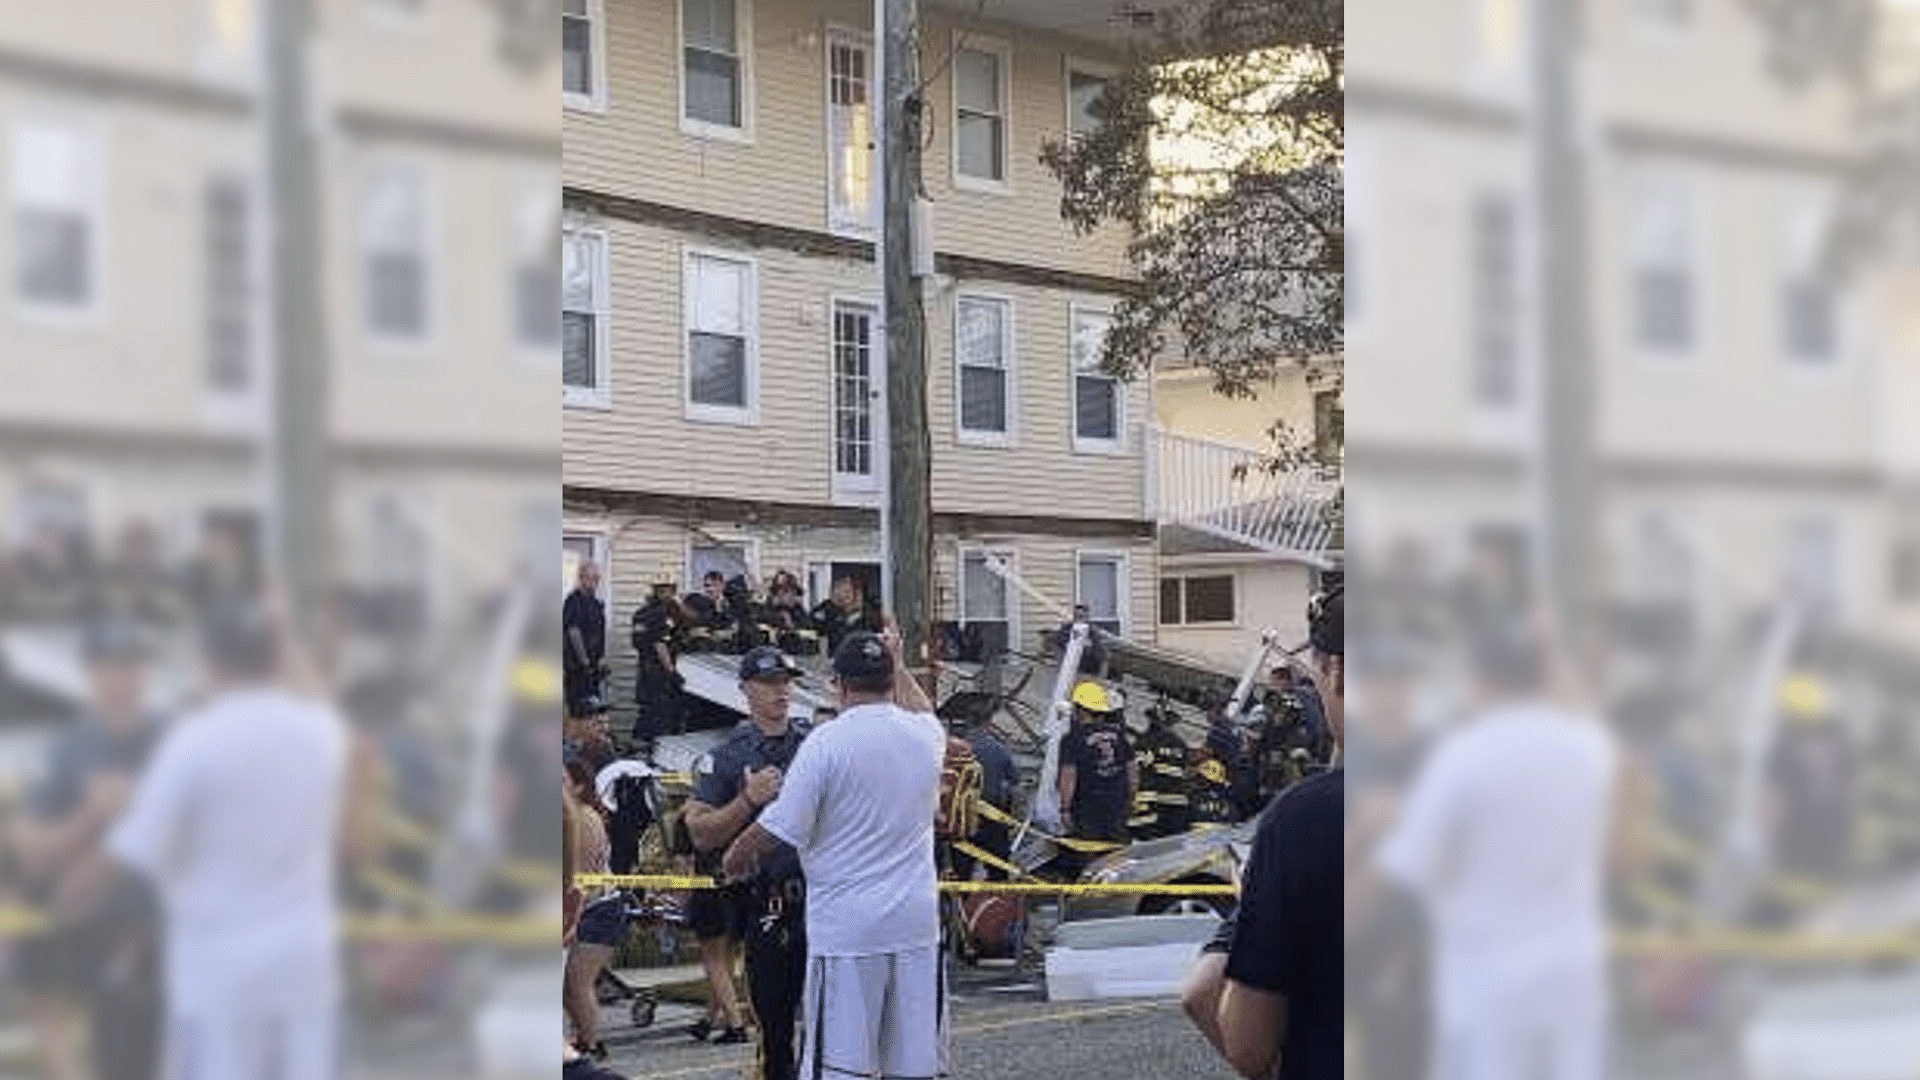 In this photo provided by James Macheda, first responders work the scene of a building structure damage in Wildwood, New Jersey, on Saturday, 14 September 2019. Multiple levels of decking attached to a building collapsed Saturday evening at the Jersey Shore, trapping people and injuring several, including children, officials and witnesses said.&nbsp;